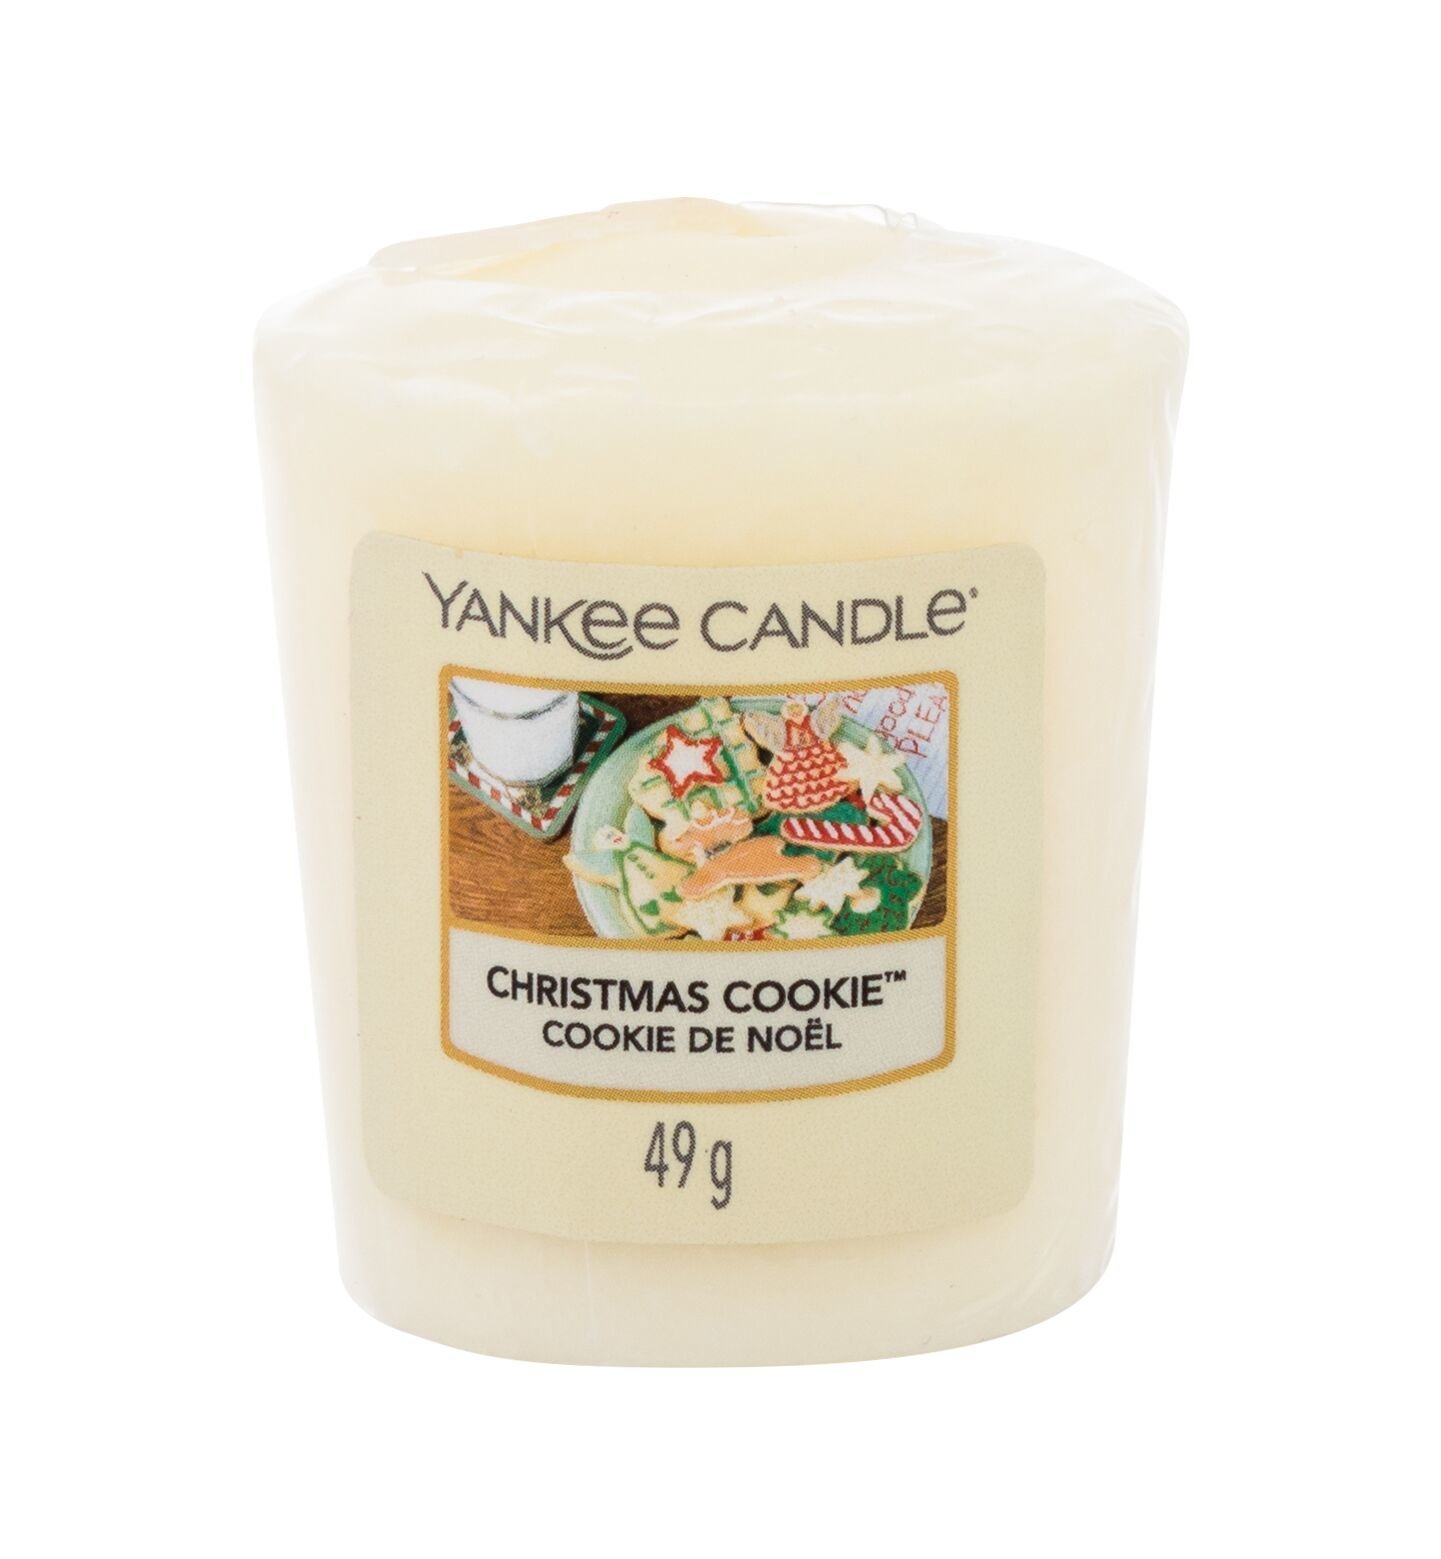 Yankee Candle Christmas Cookie 49g Kvepalai Unisex Scented Candle